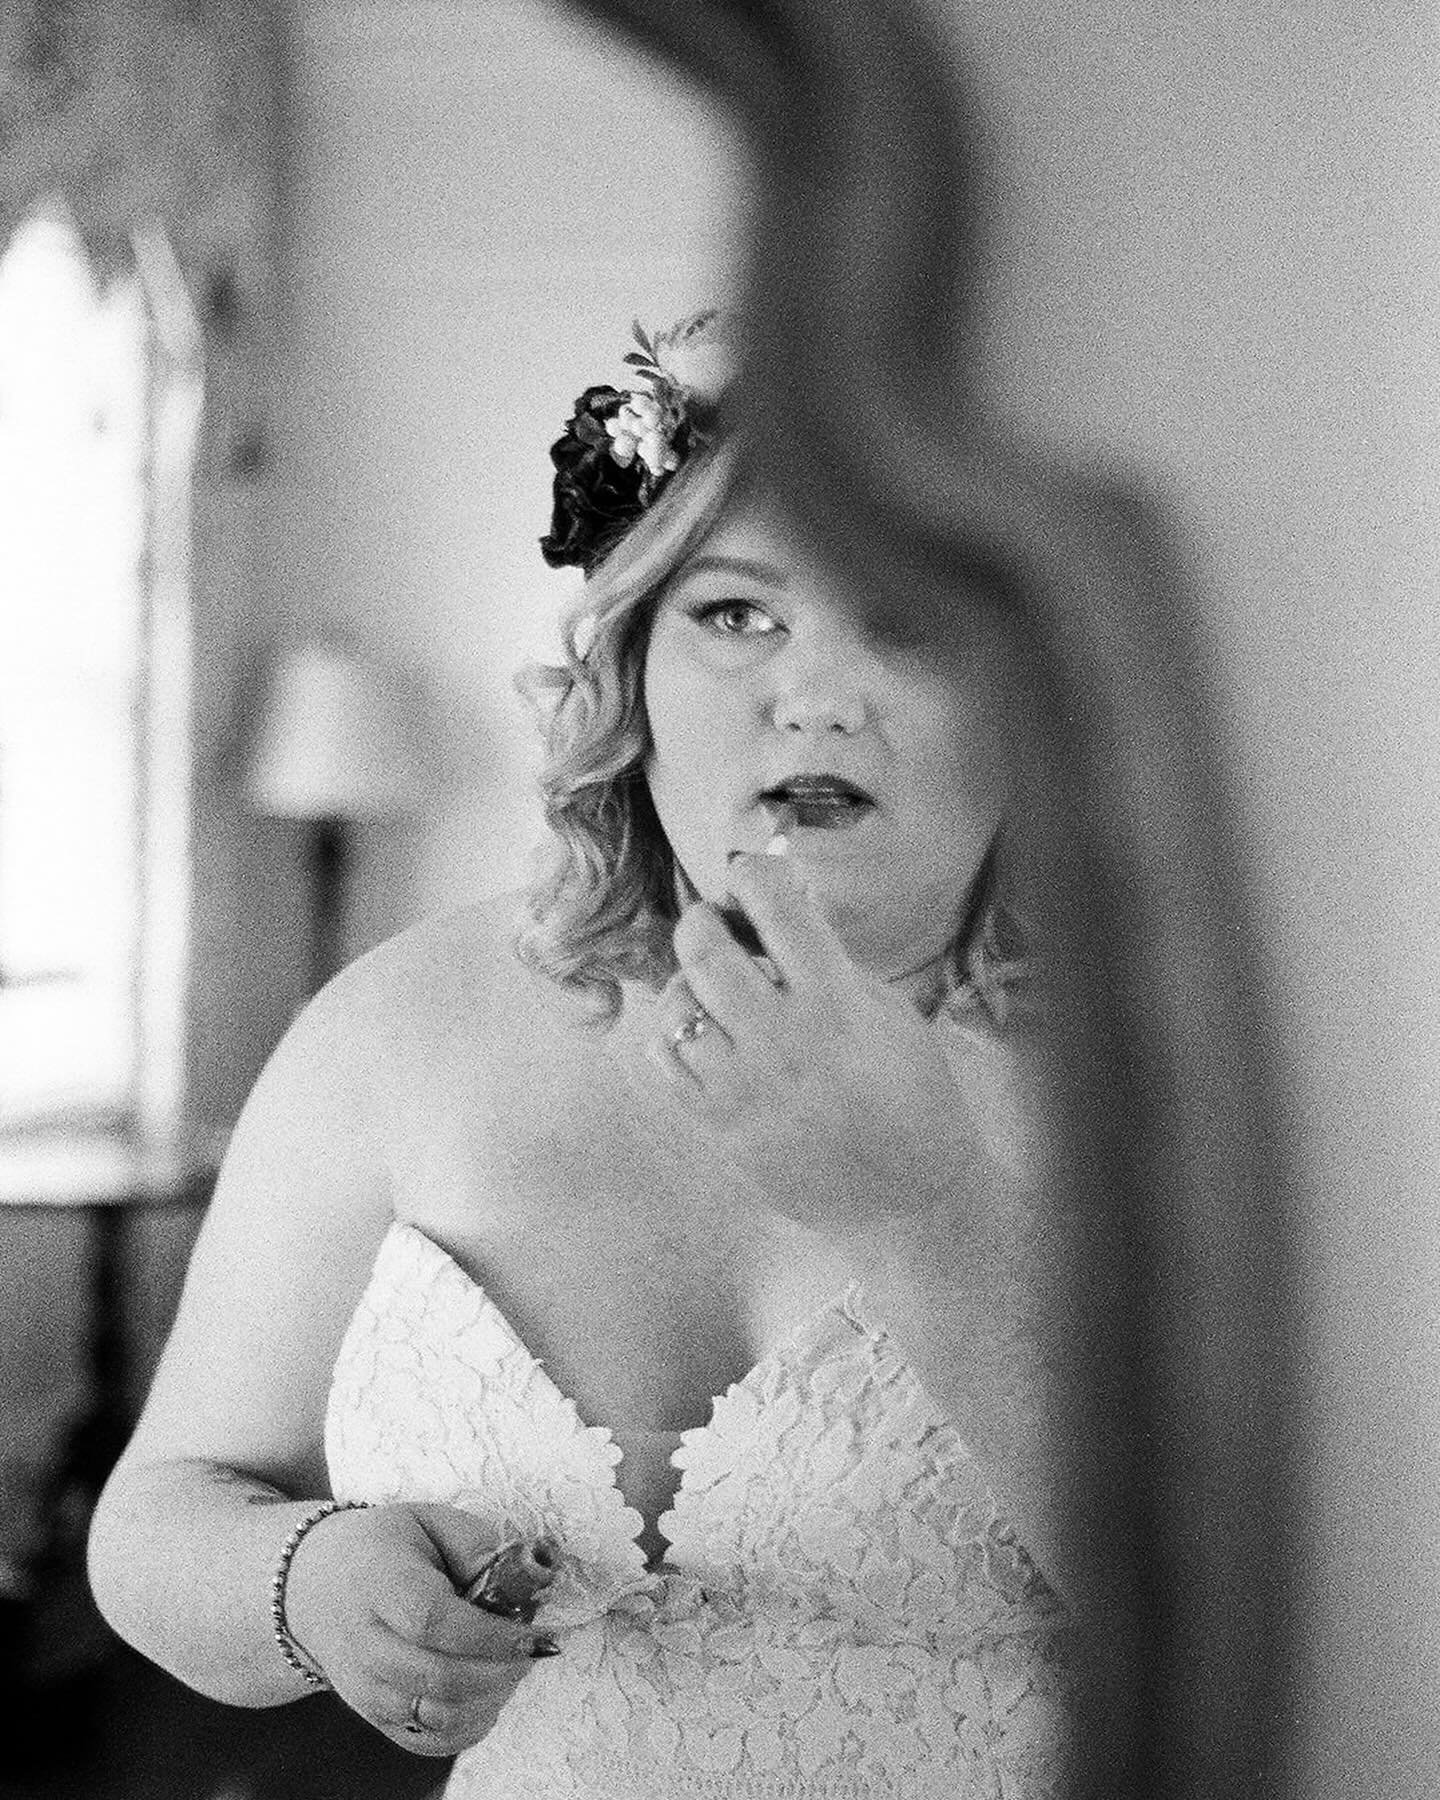 Throwback to morning moments and this lovely human getting ready for her wedding in Savannah
⠀⠀⠀⠀⠀⠀⠀⠀⠀
Photographed on Tri-X.
Developed by @photovision_prints
⠀⠀⠀⠀⠀⠀⠀⠀⠀
⠀⠀⠀⠀⠀⠀⠀⠀⠀
@ryder0701
@danii_gates
Venue - @thegastonian
Dress - @essenseofaustral